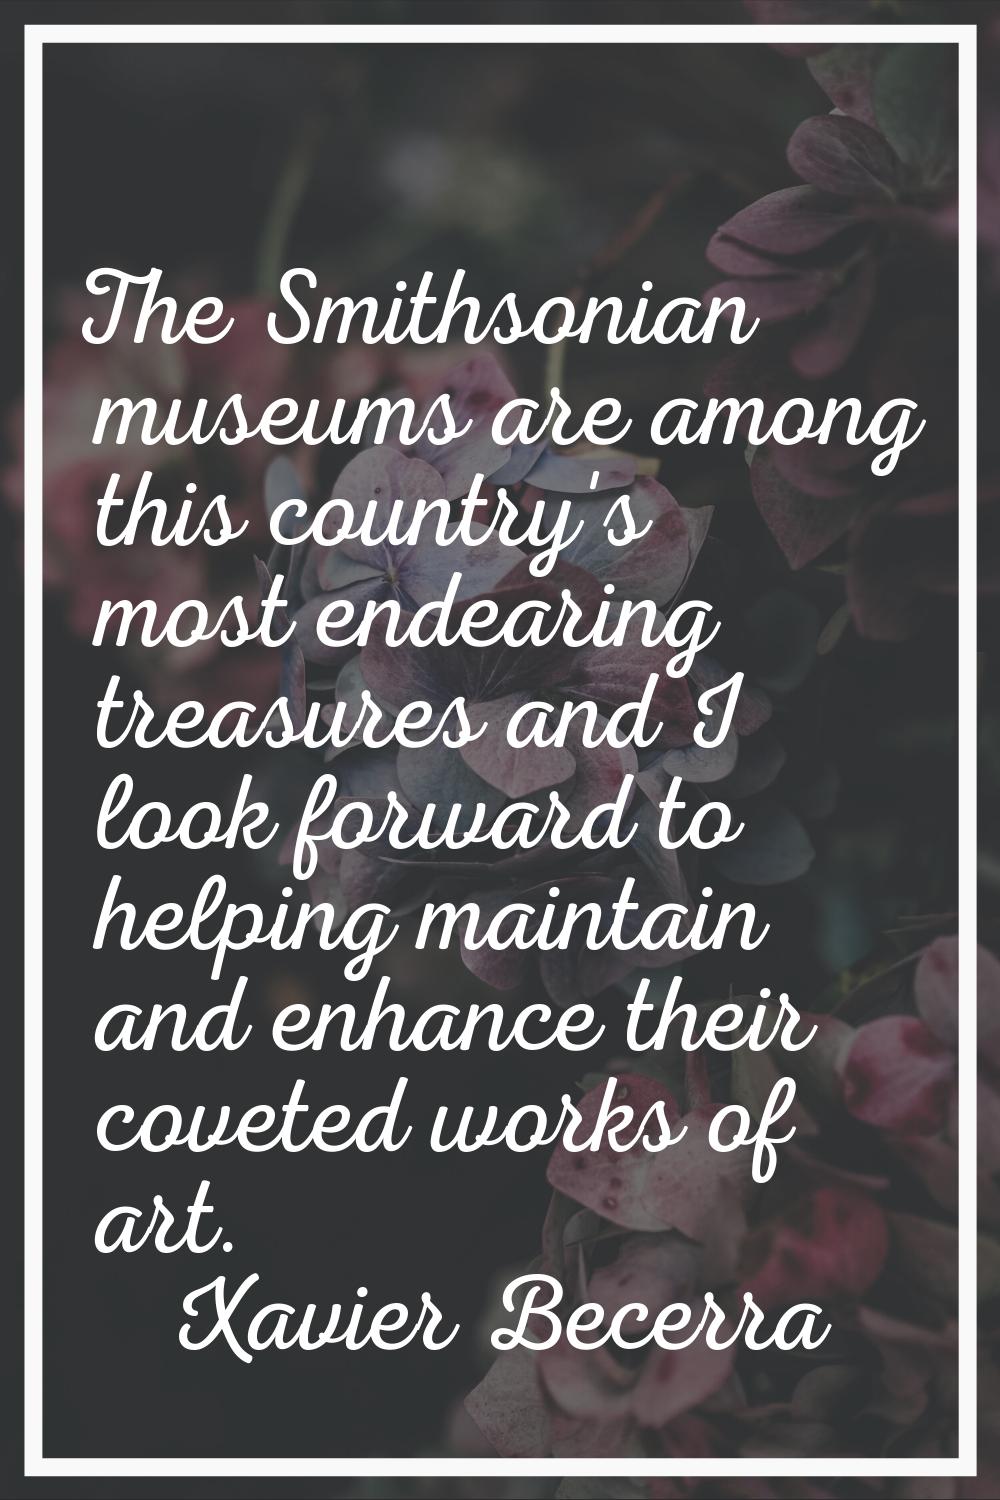 The Smithsonian museums are among this country's most endearing treasures and I look forward to hel